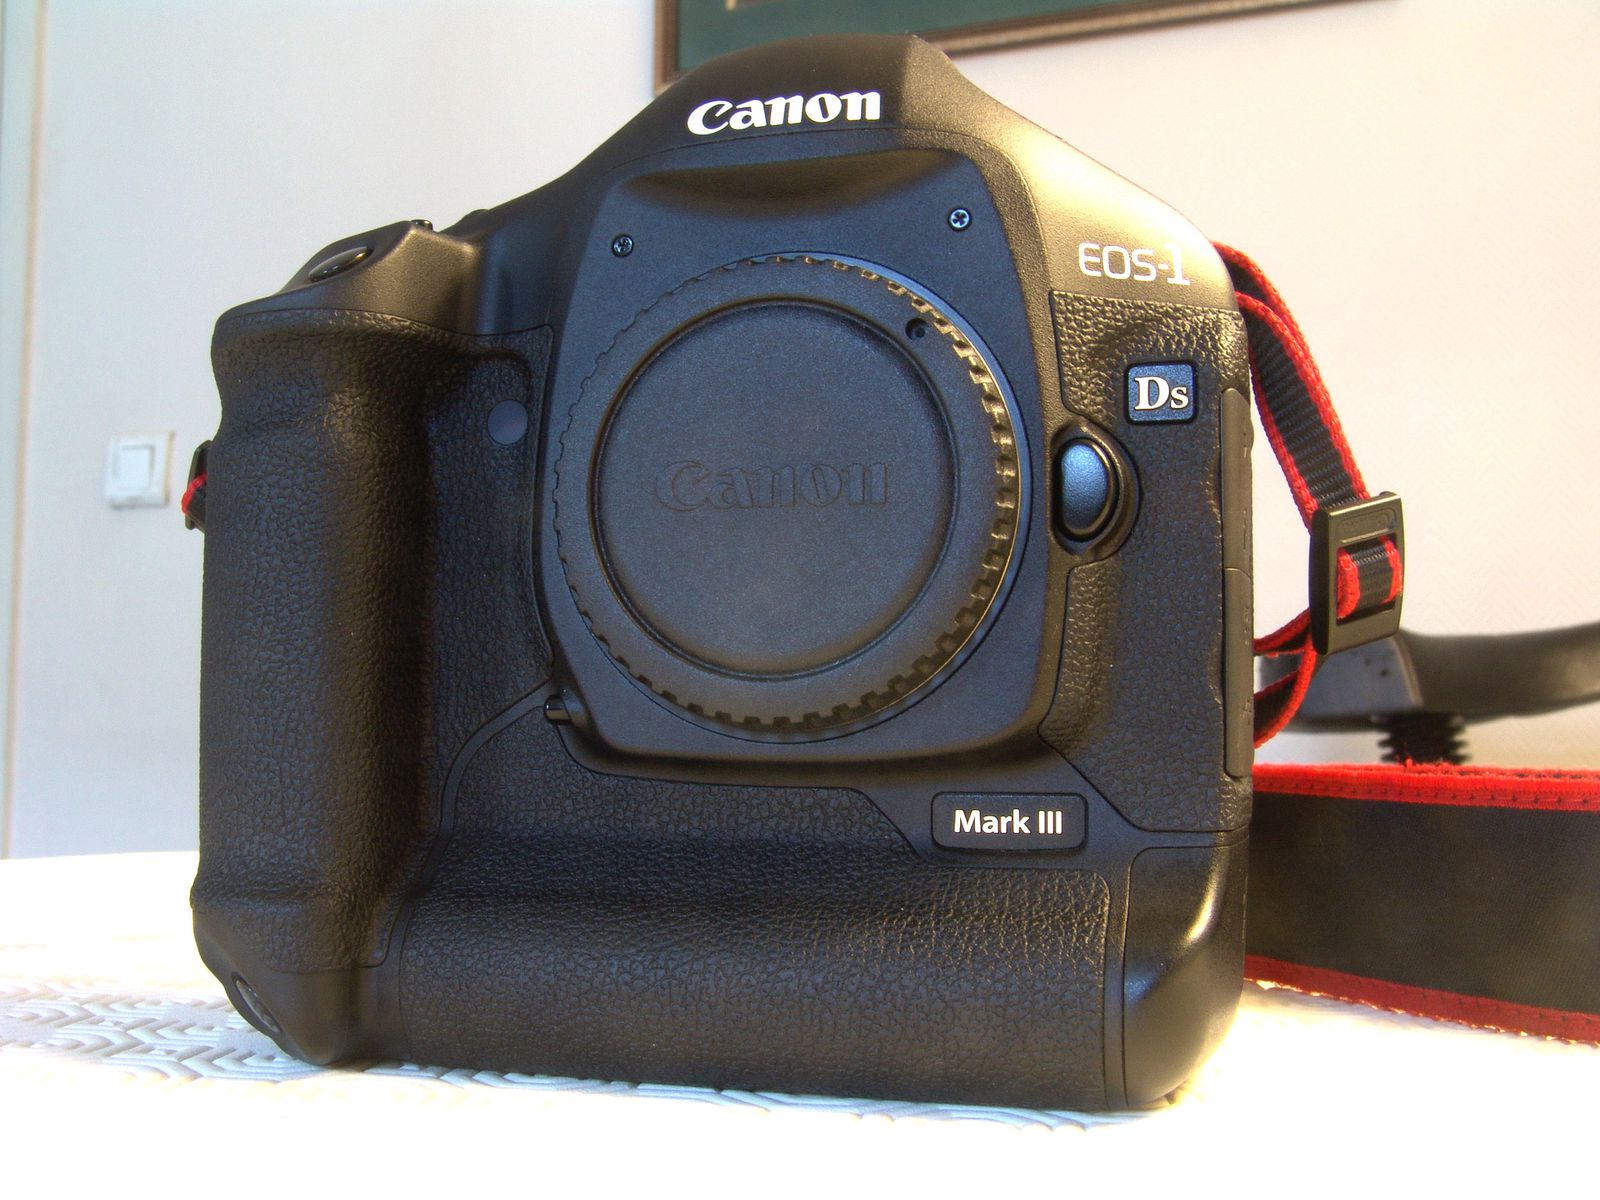 http://idata.over-blog.com/2/47/20/28/Annonce-canon-ds/Annonce-canon-ds06166.jpg